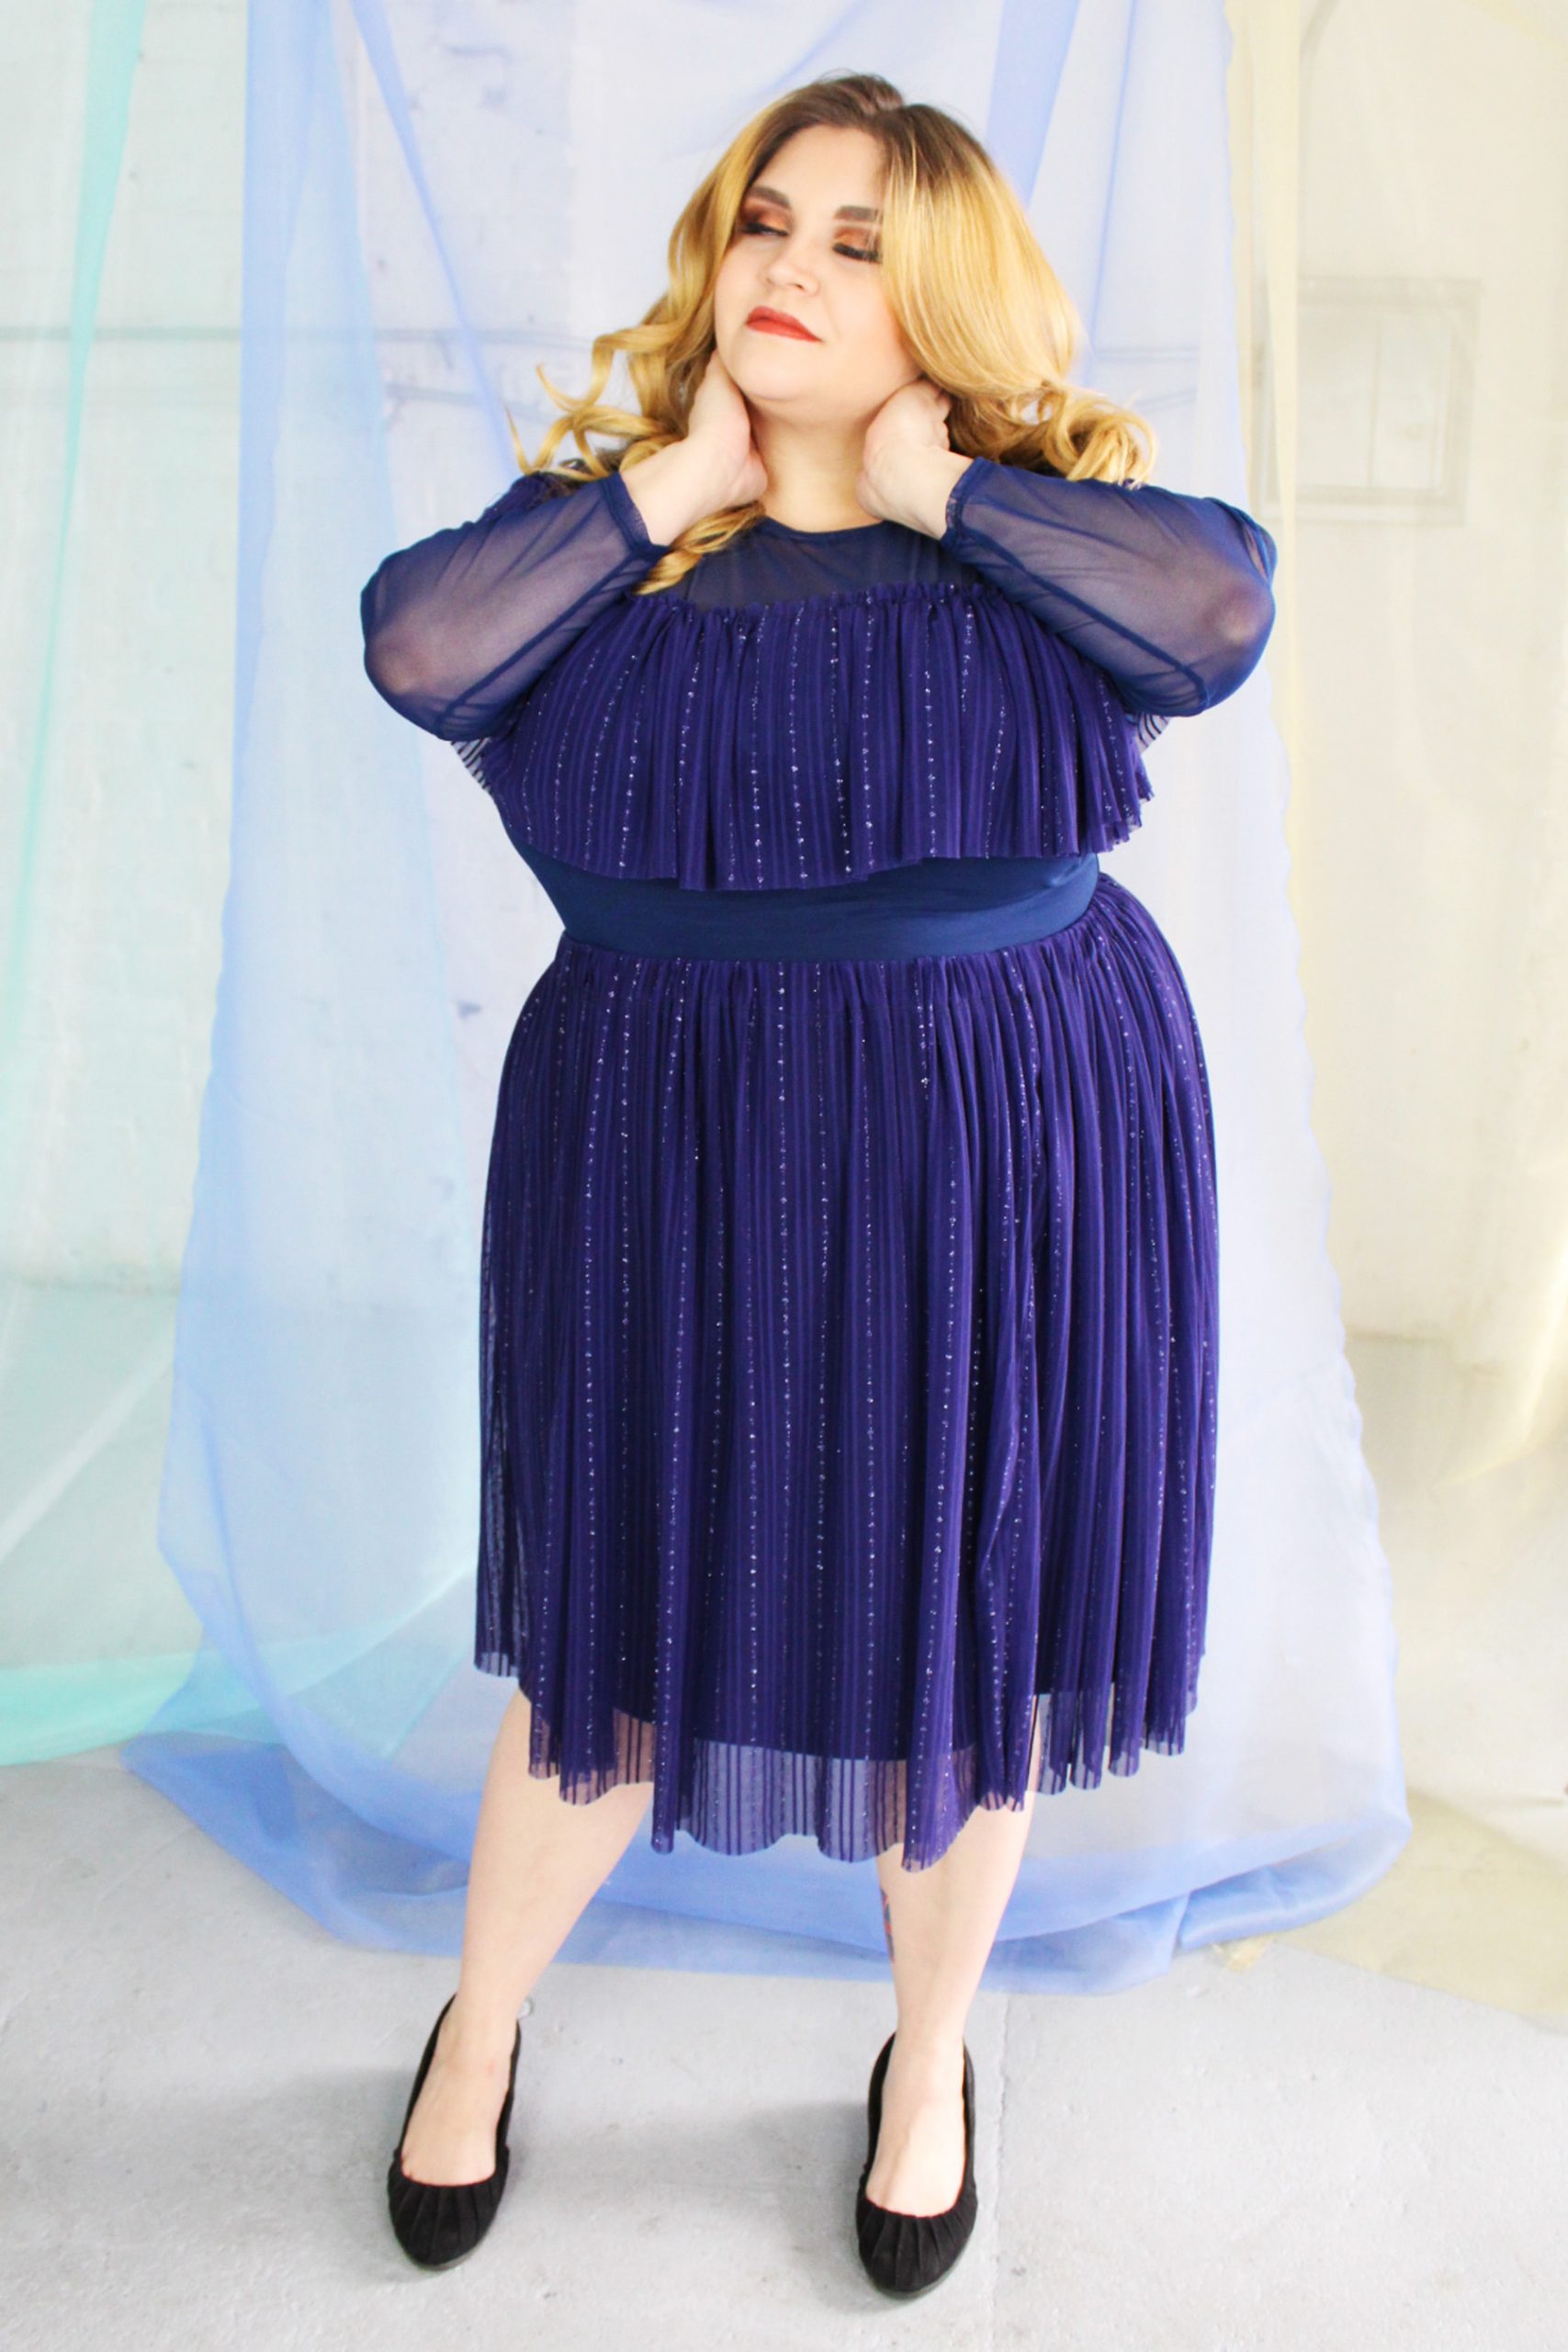 White blonde plus size model wearing navy classic blue mesh skirt smiling and happy, with matching long sleeve ruffle top